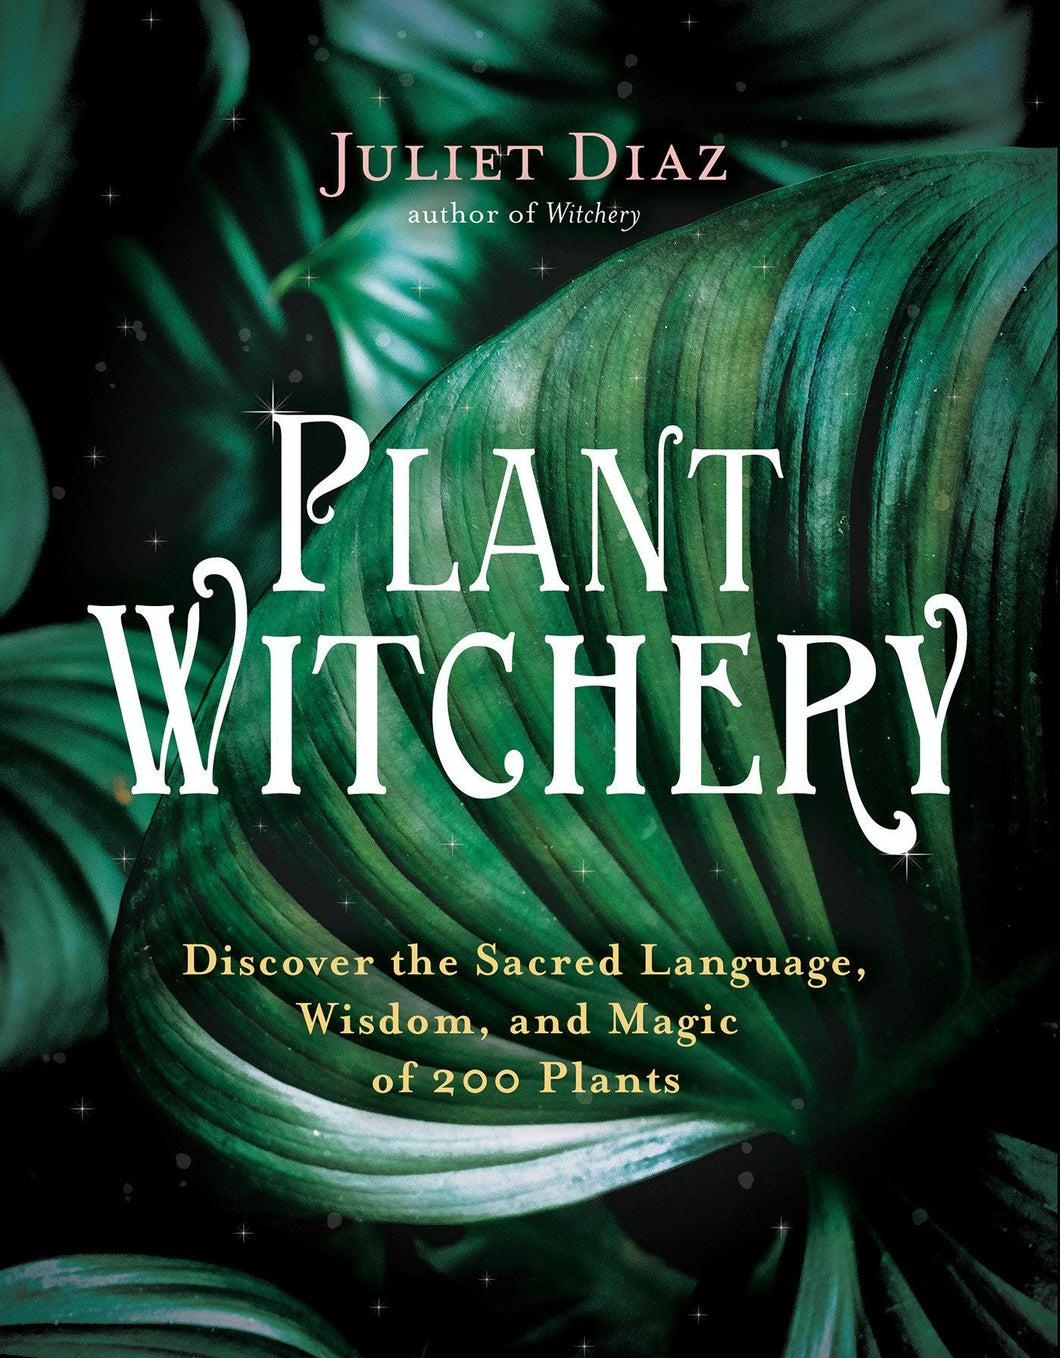 Plant Witchery: Discover The Sacred Language, Wisdom, And Magic Of 200 Plants [Juliet Diaz]